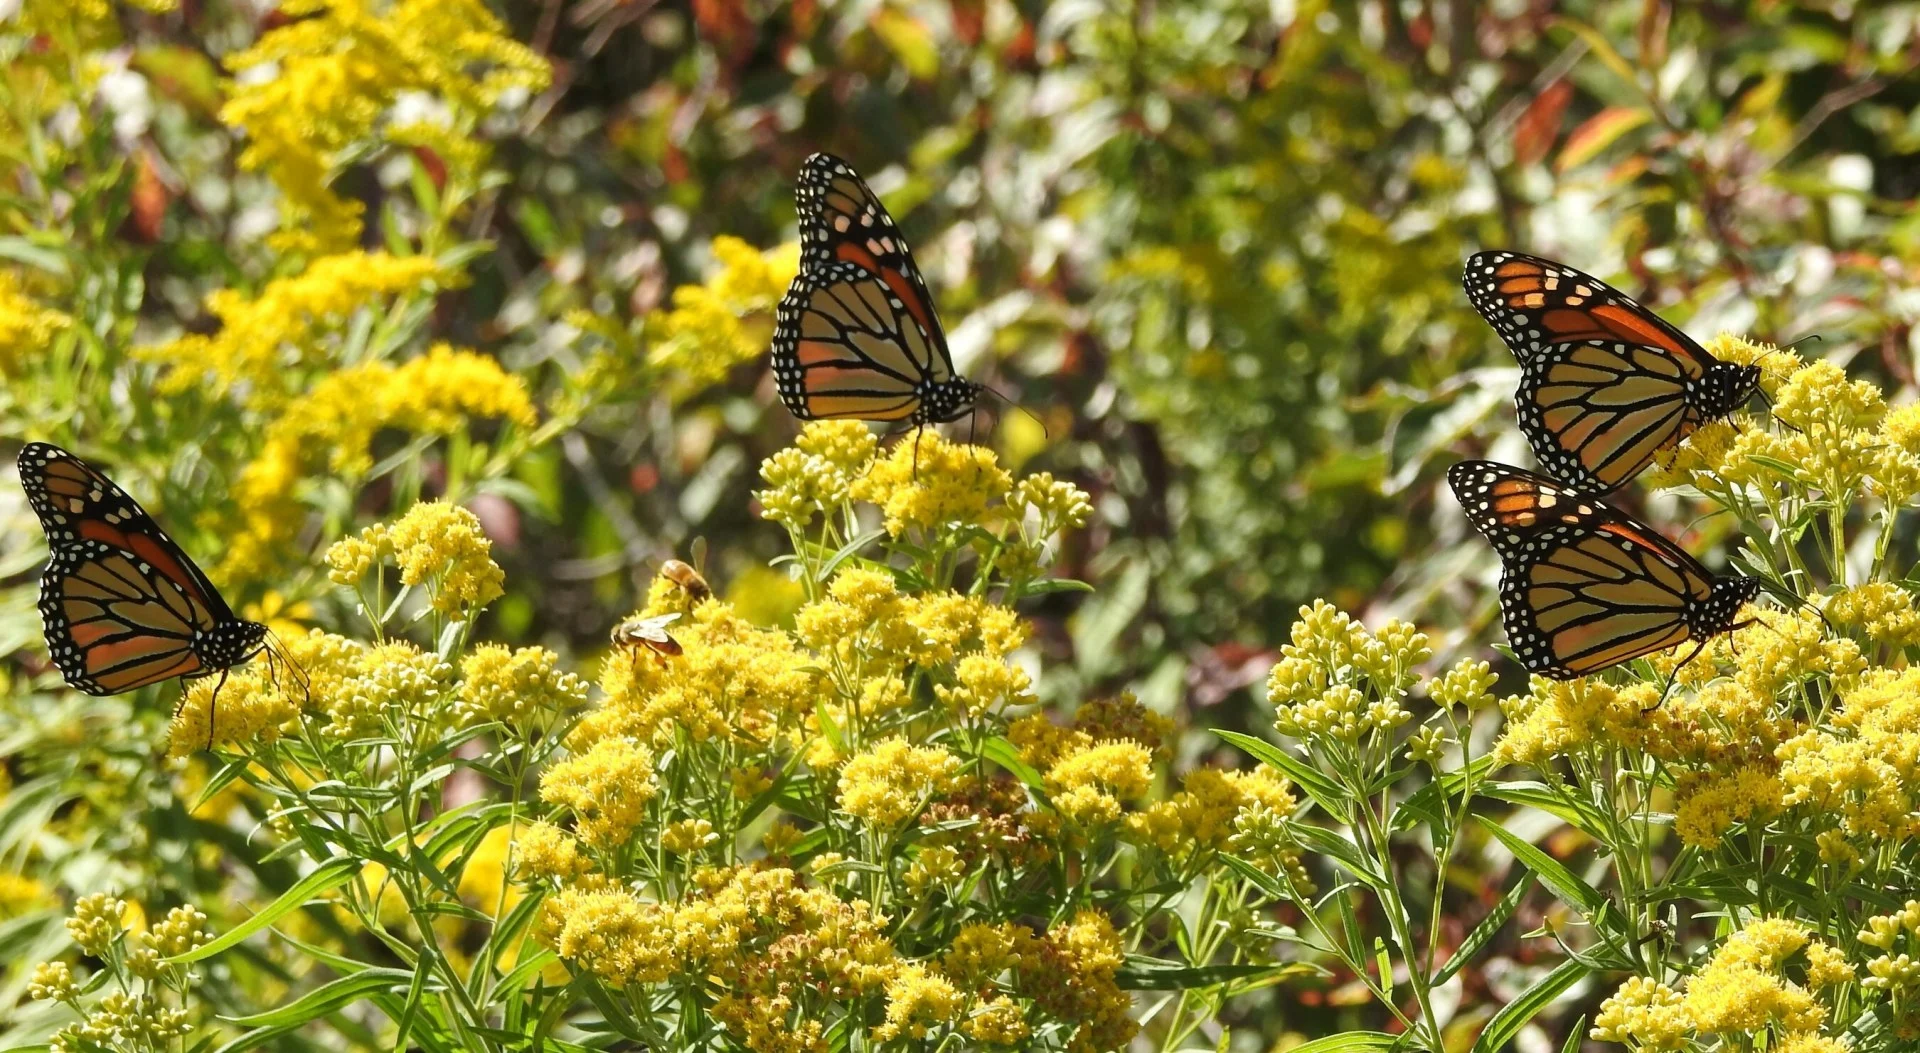 407 ETR to help transform roadsides across the GTHA into a pollinator's paradise